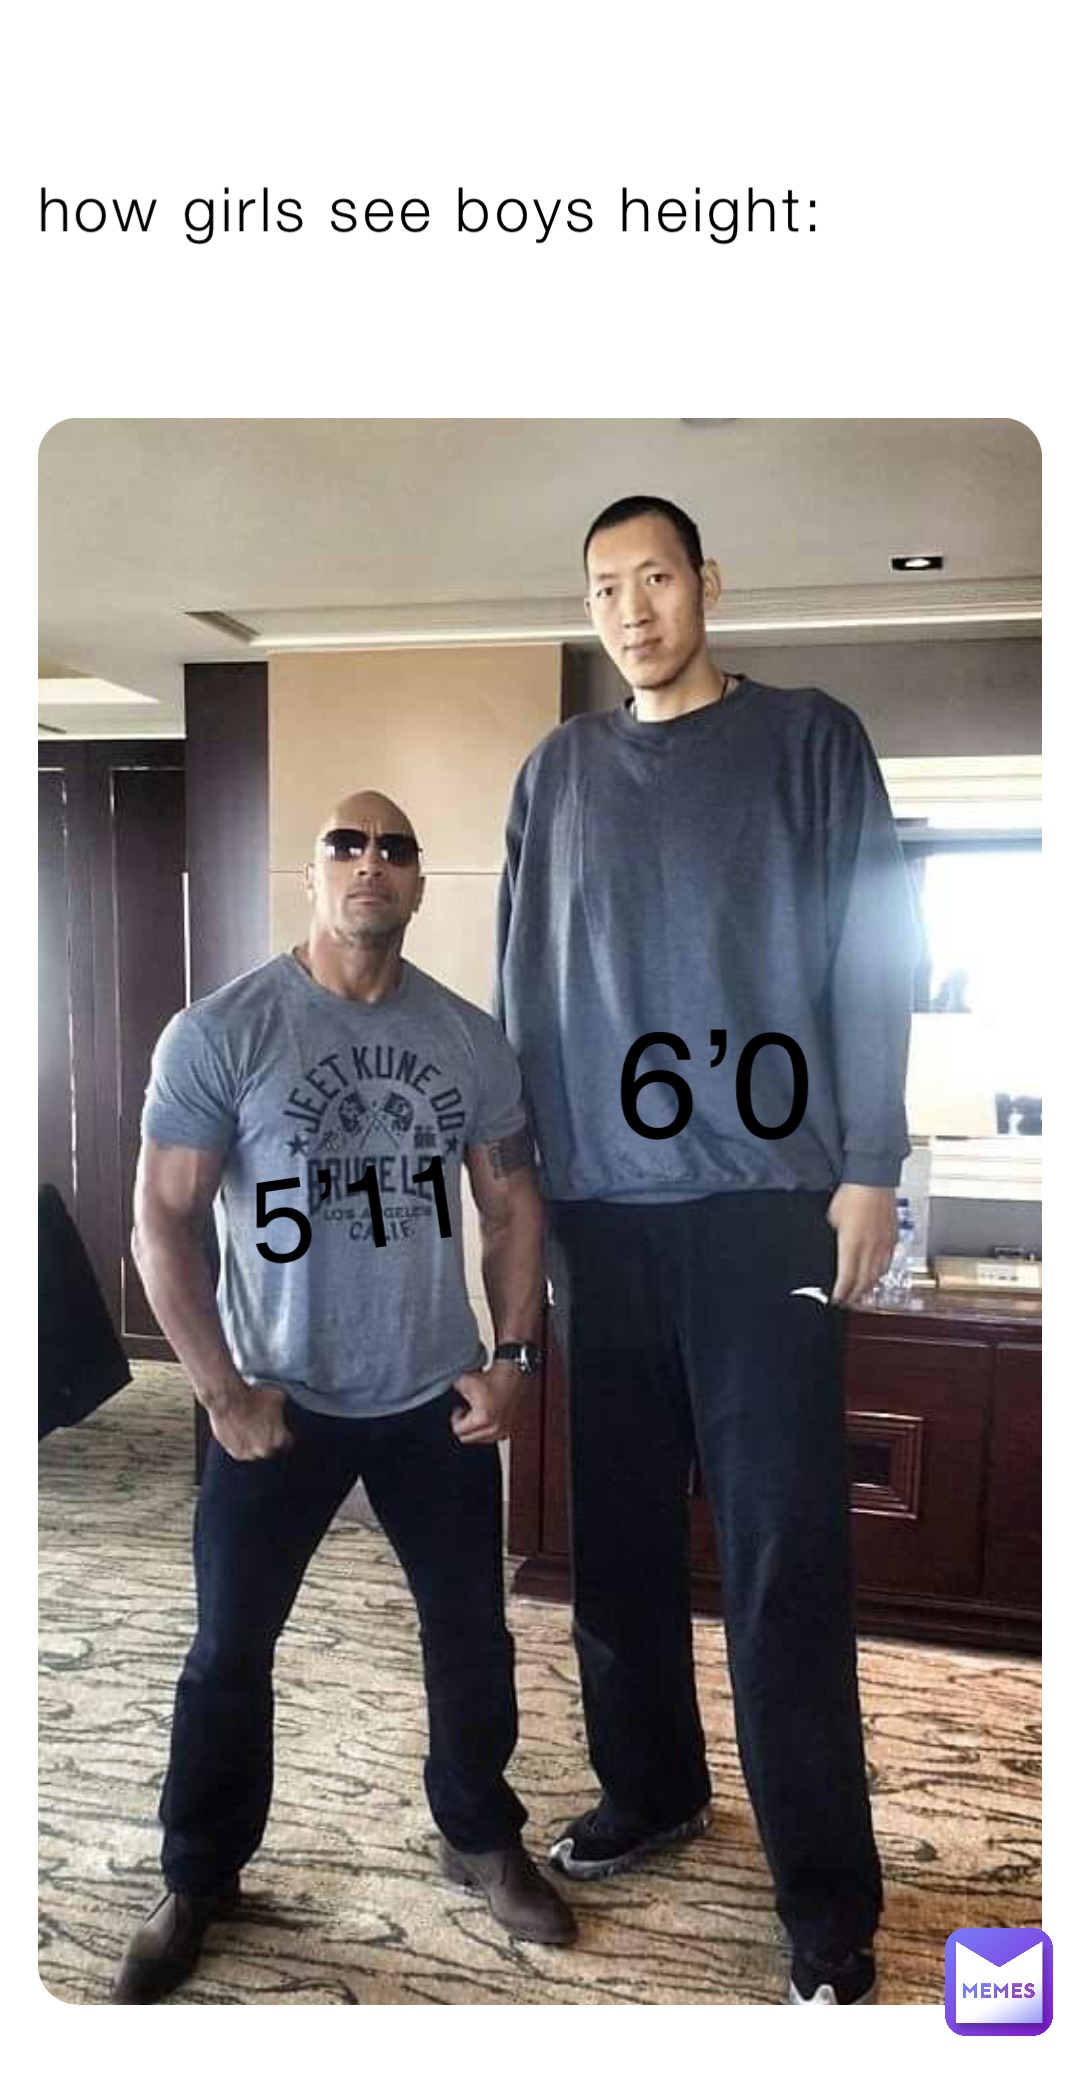 how girls see boys height: 5’11 6’0